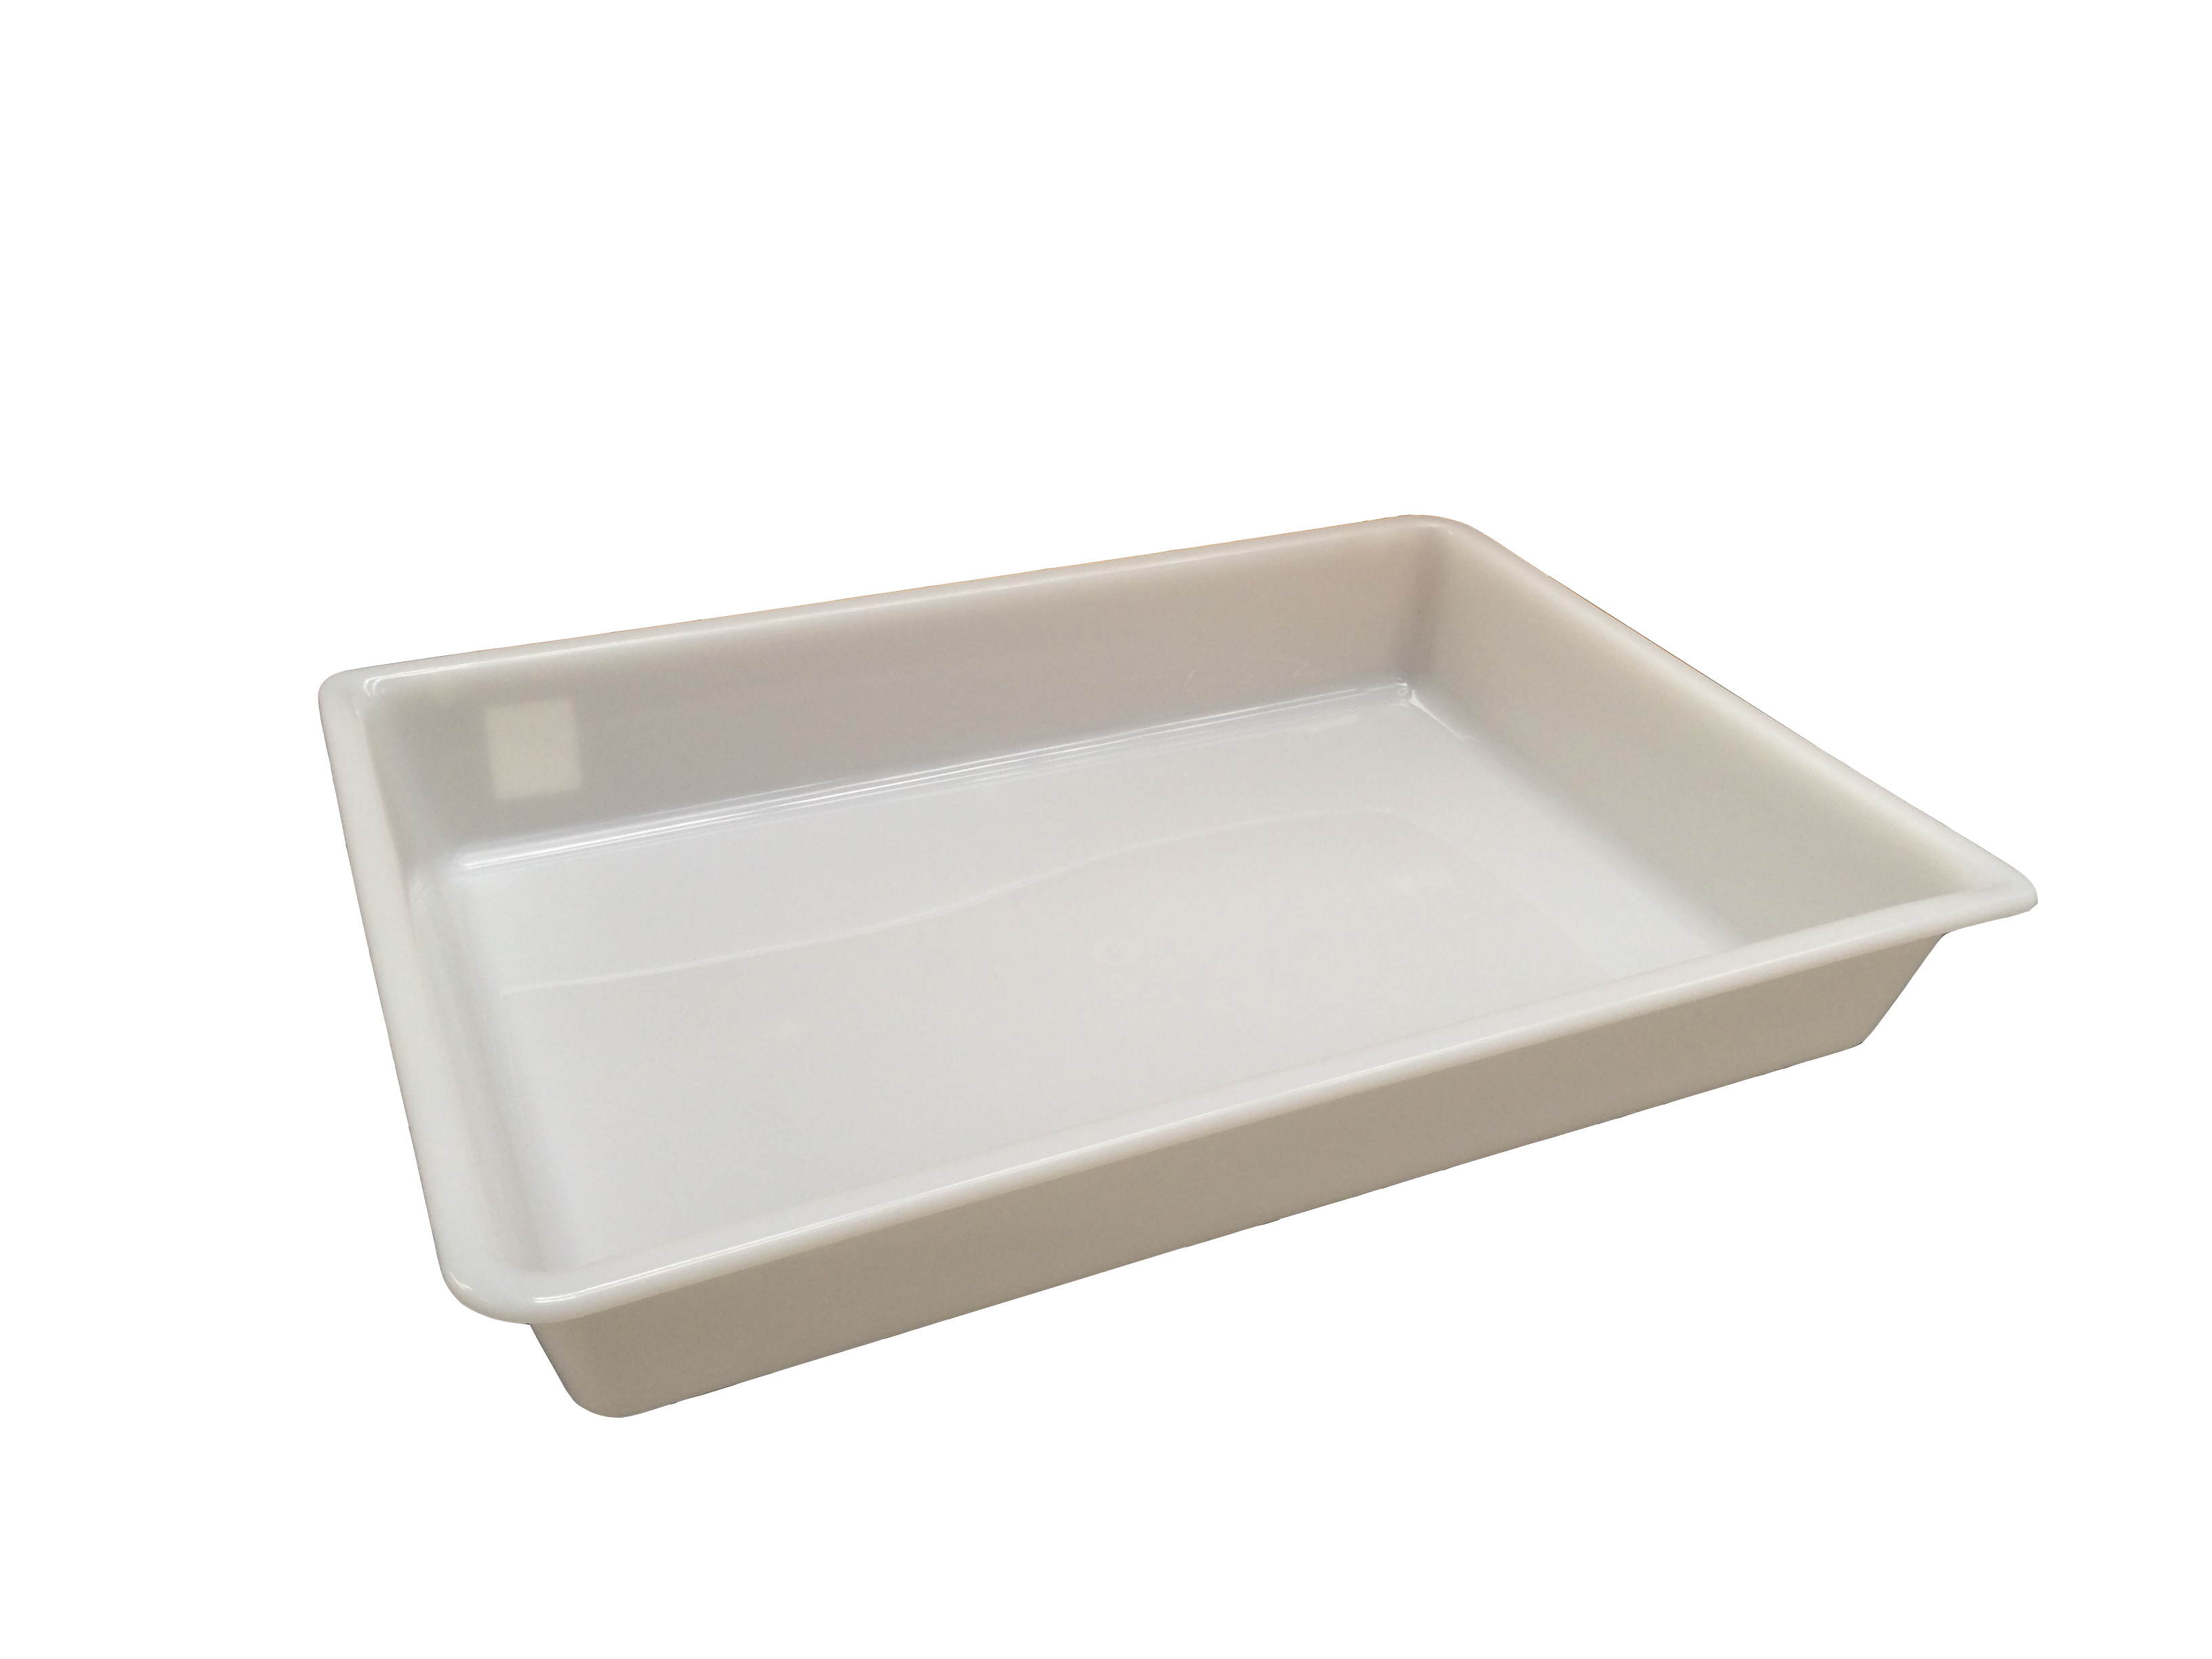 12 Litre Food Grade Plastic Nesting Tray/ Commercial Catering Chef's Display Tray